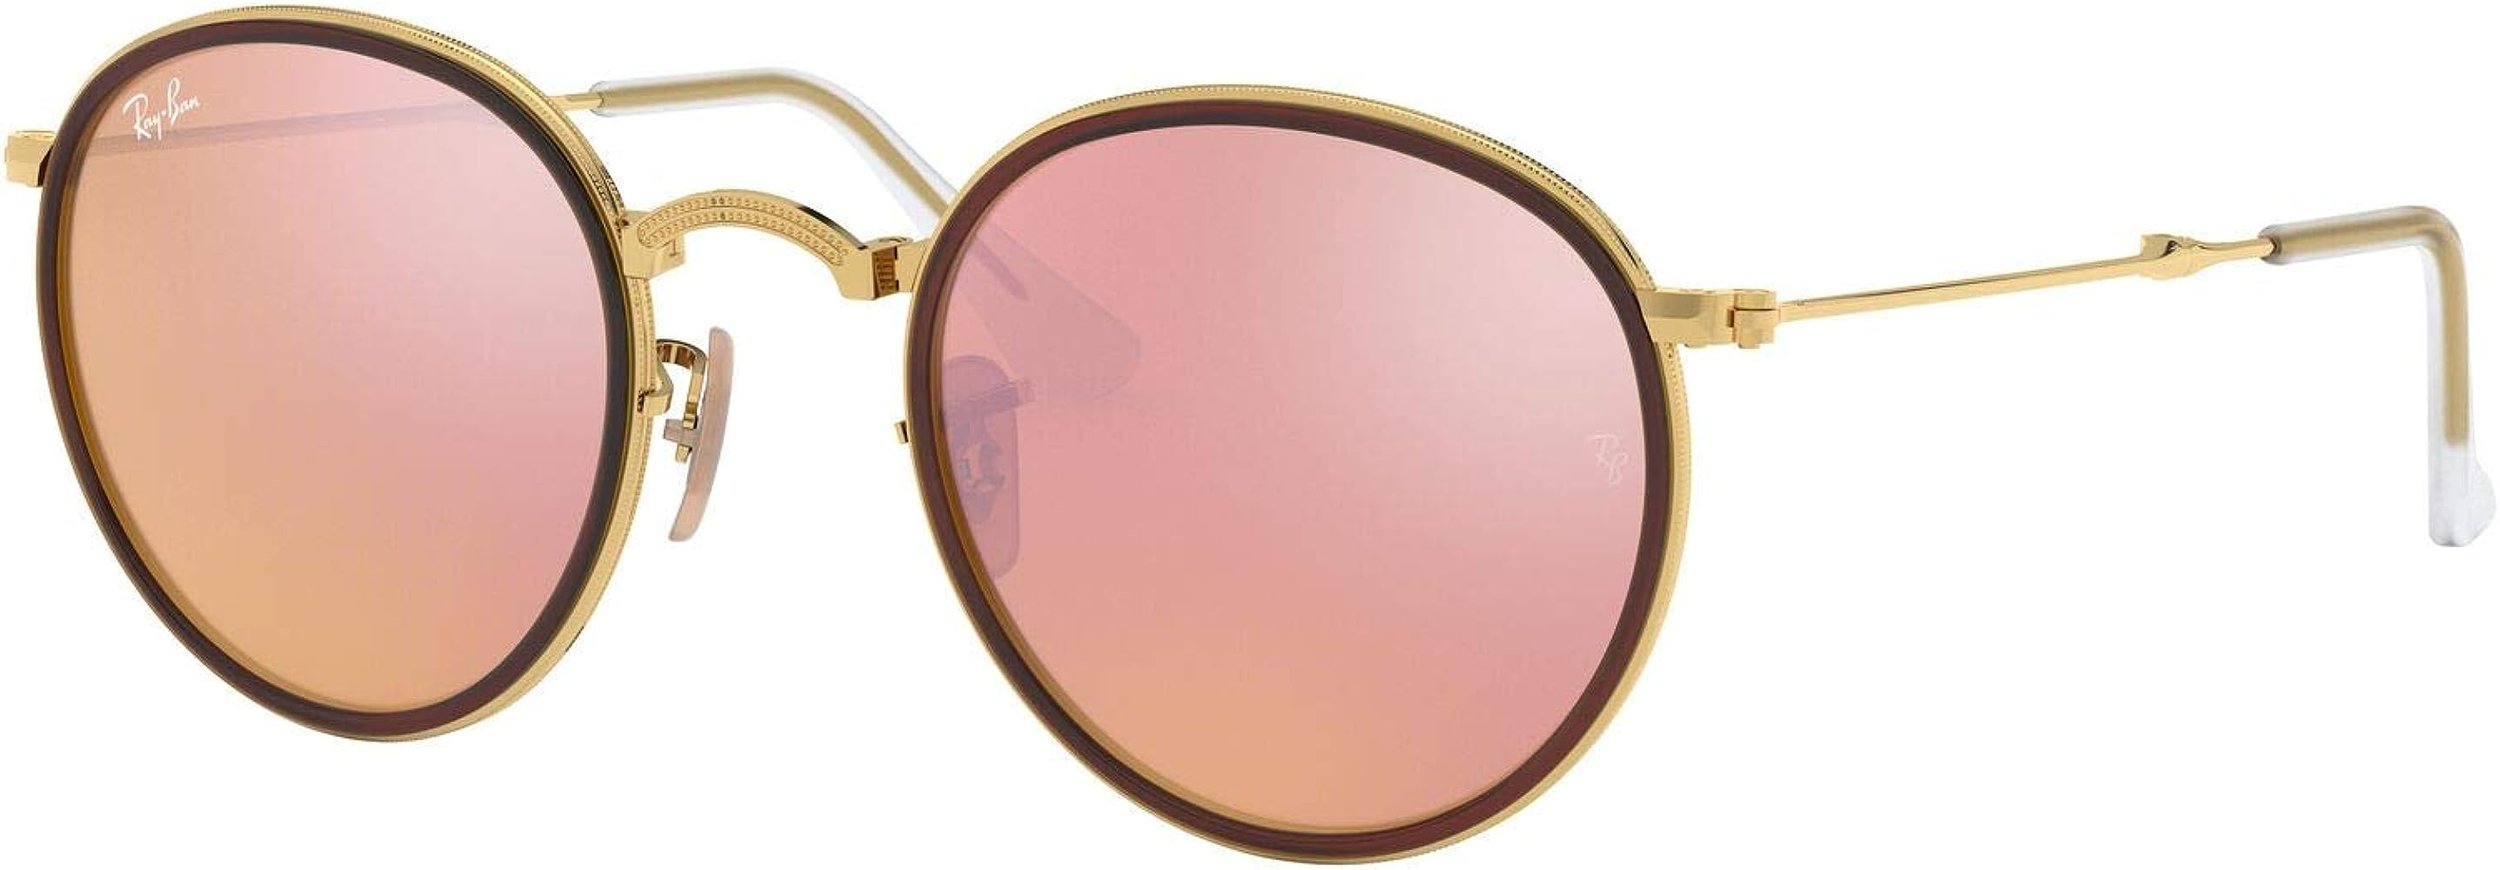 Ray-Ban RB3517 Folding Round Sunglasses in GoldLight BrownMirrored Pink.jpg